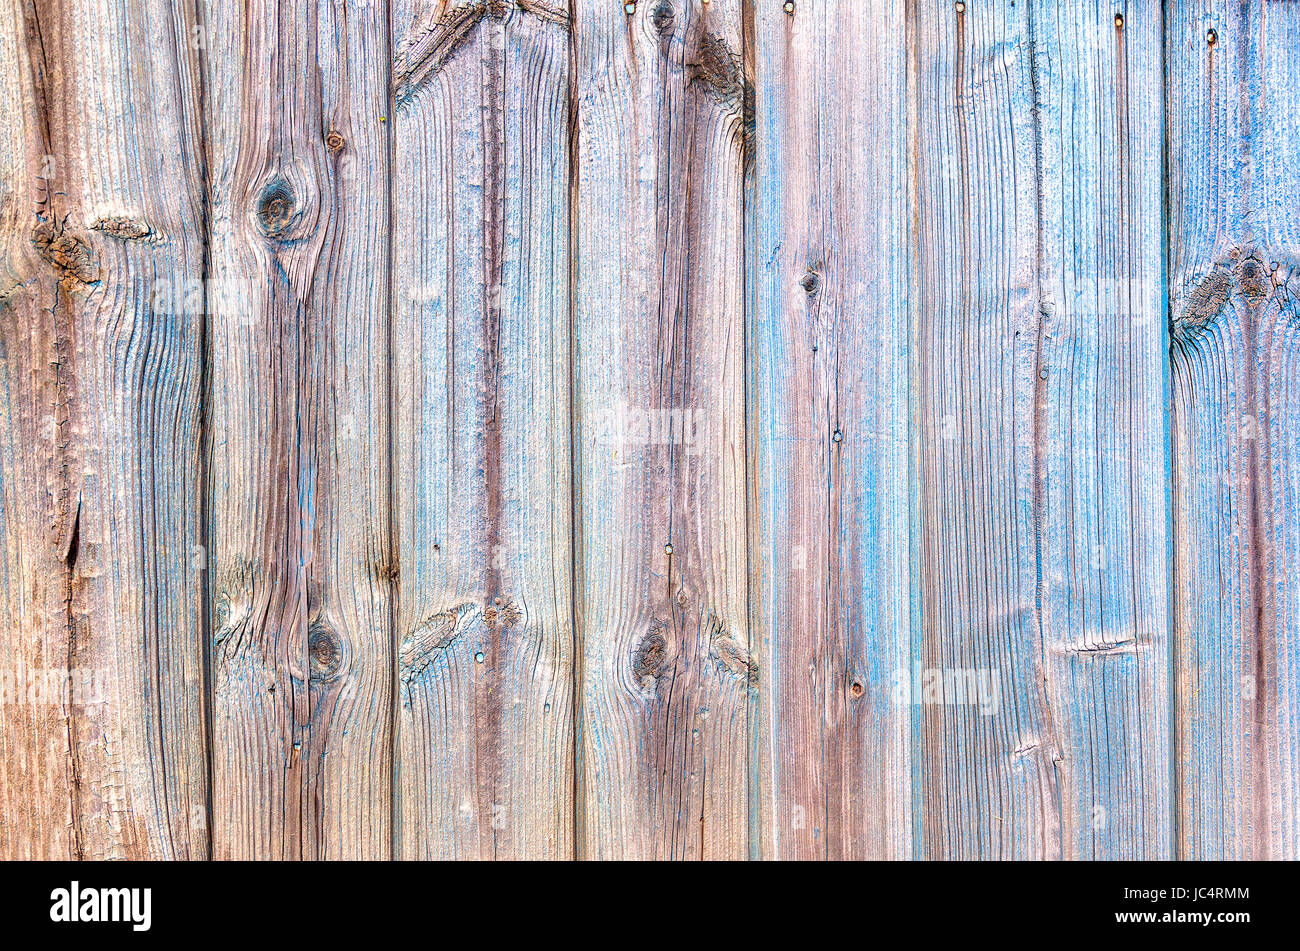 Old wooden wall background or texture Stock Photo